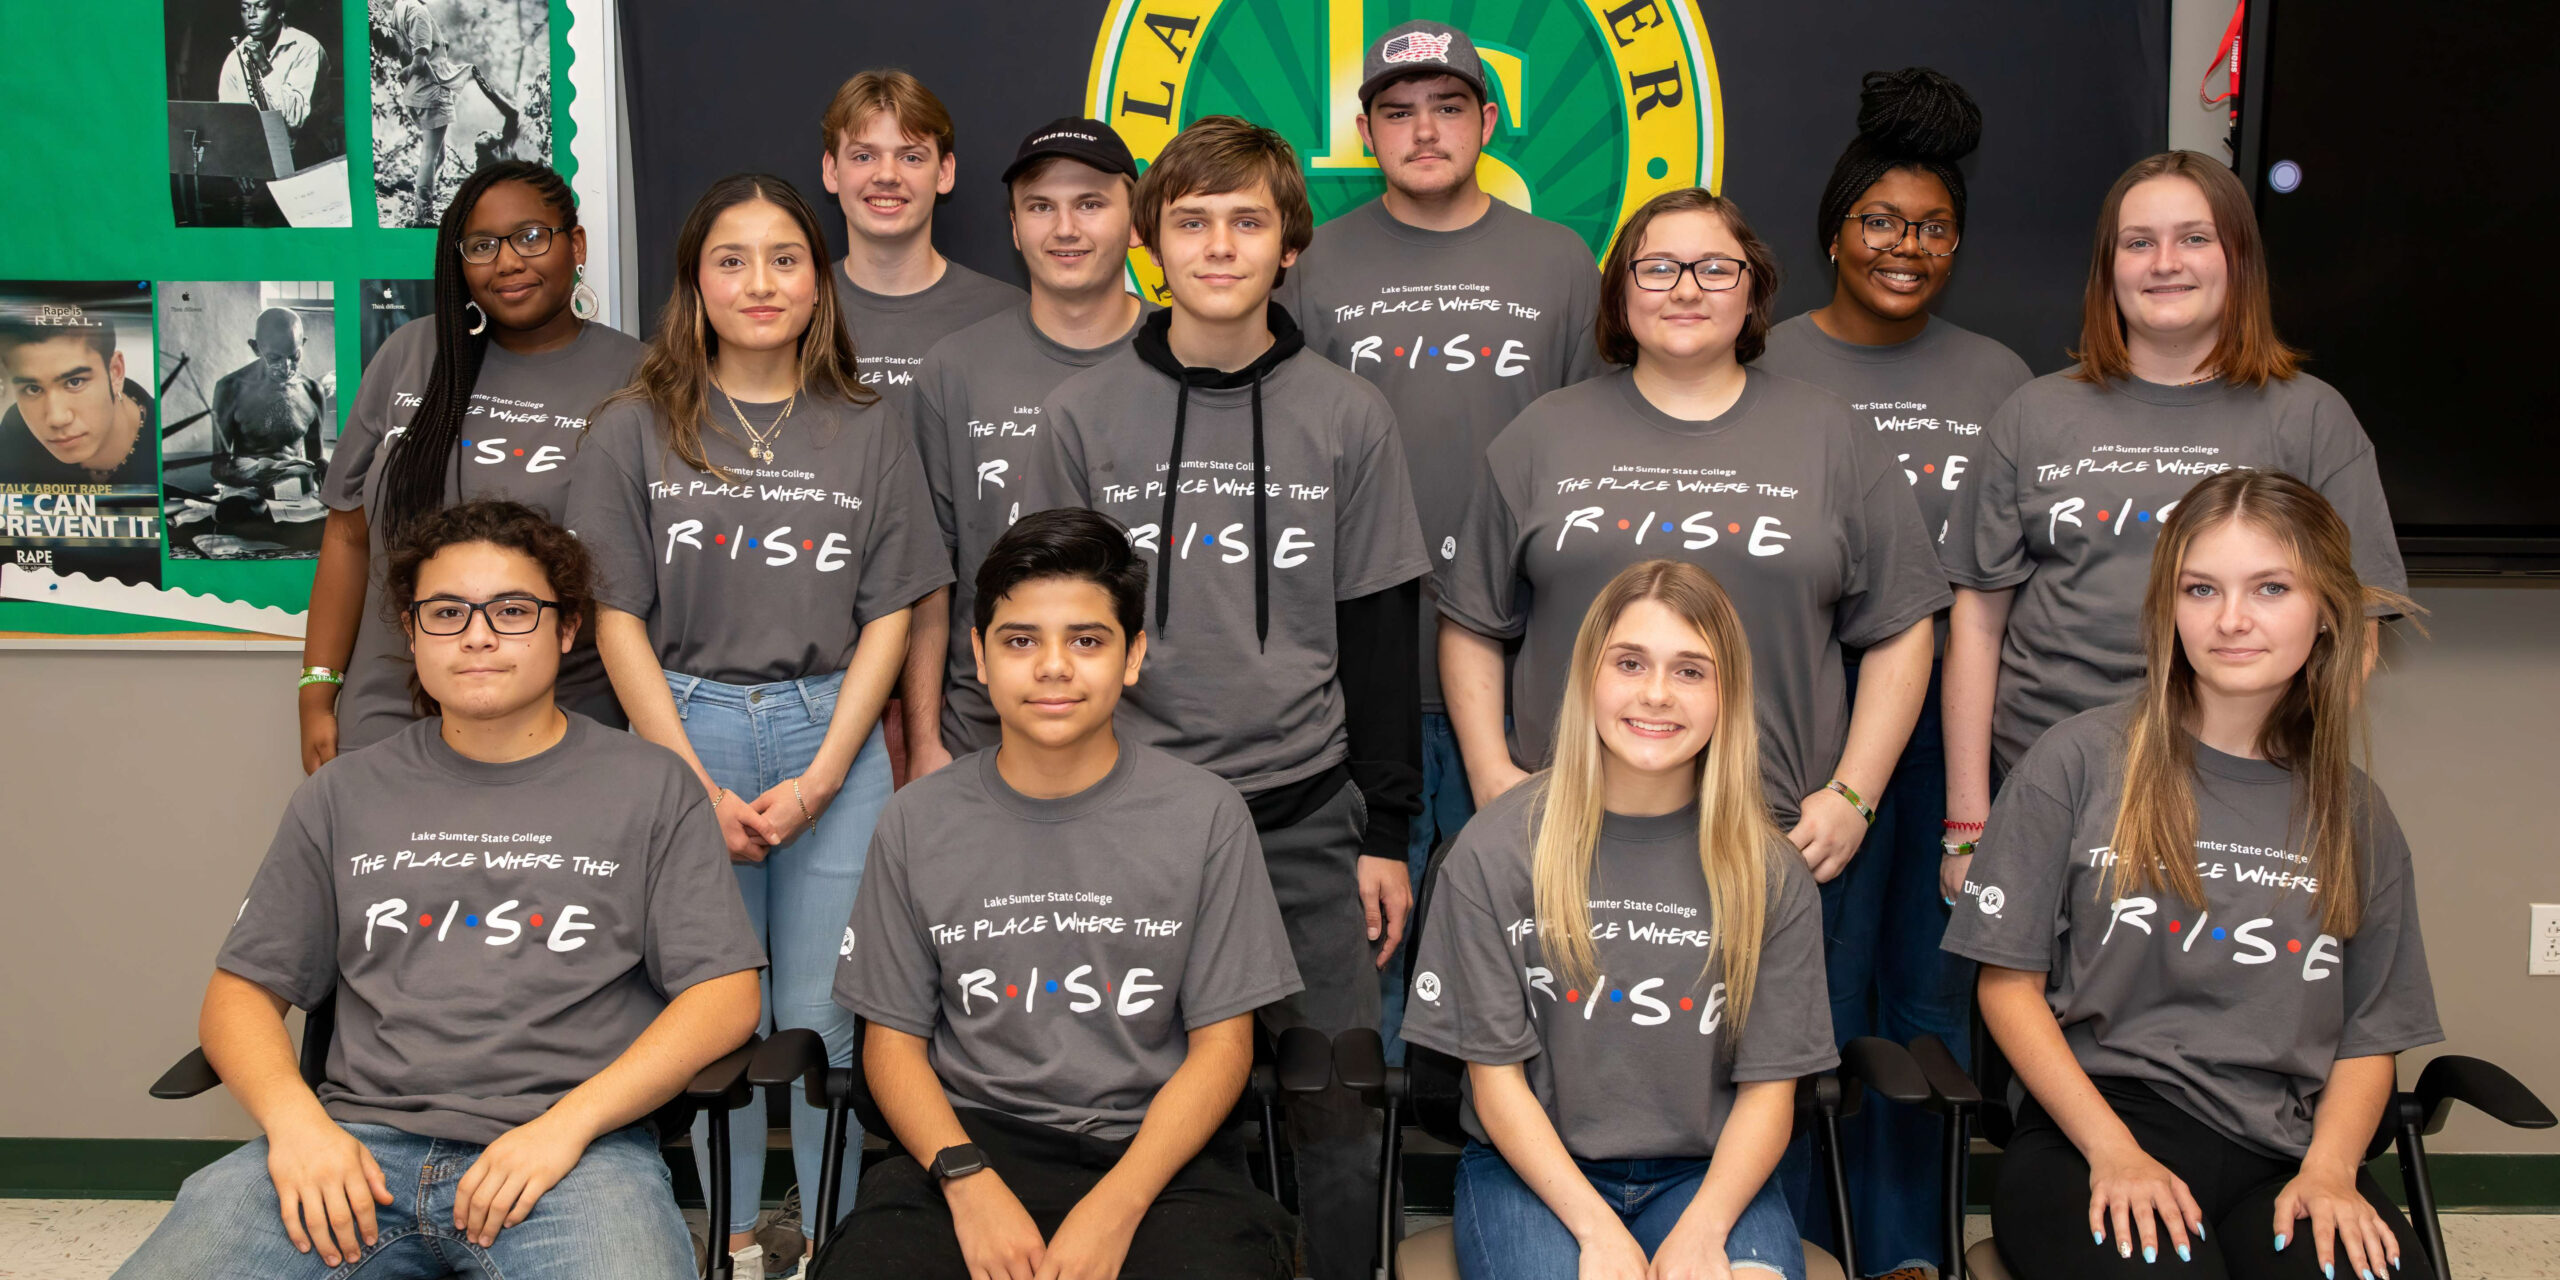 Scores are Rising – Sumter County Students Improve Their Math Skills at the LSSC RISE Academy